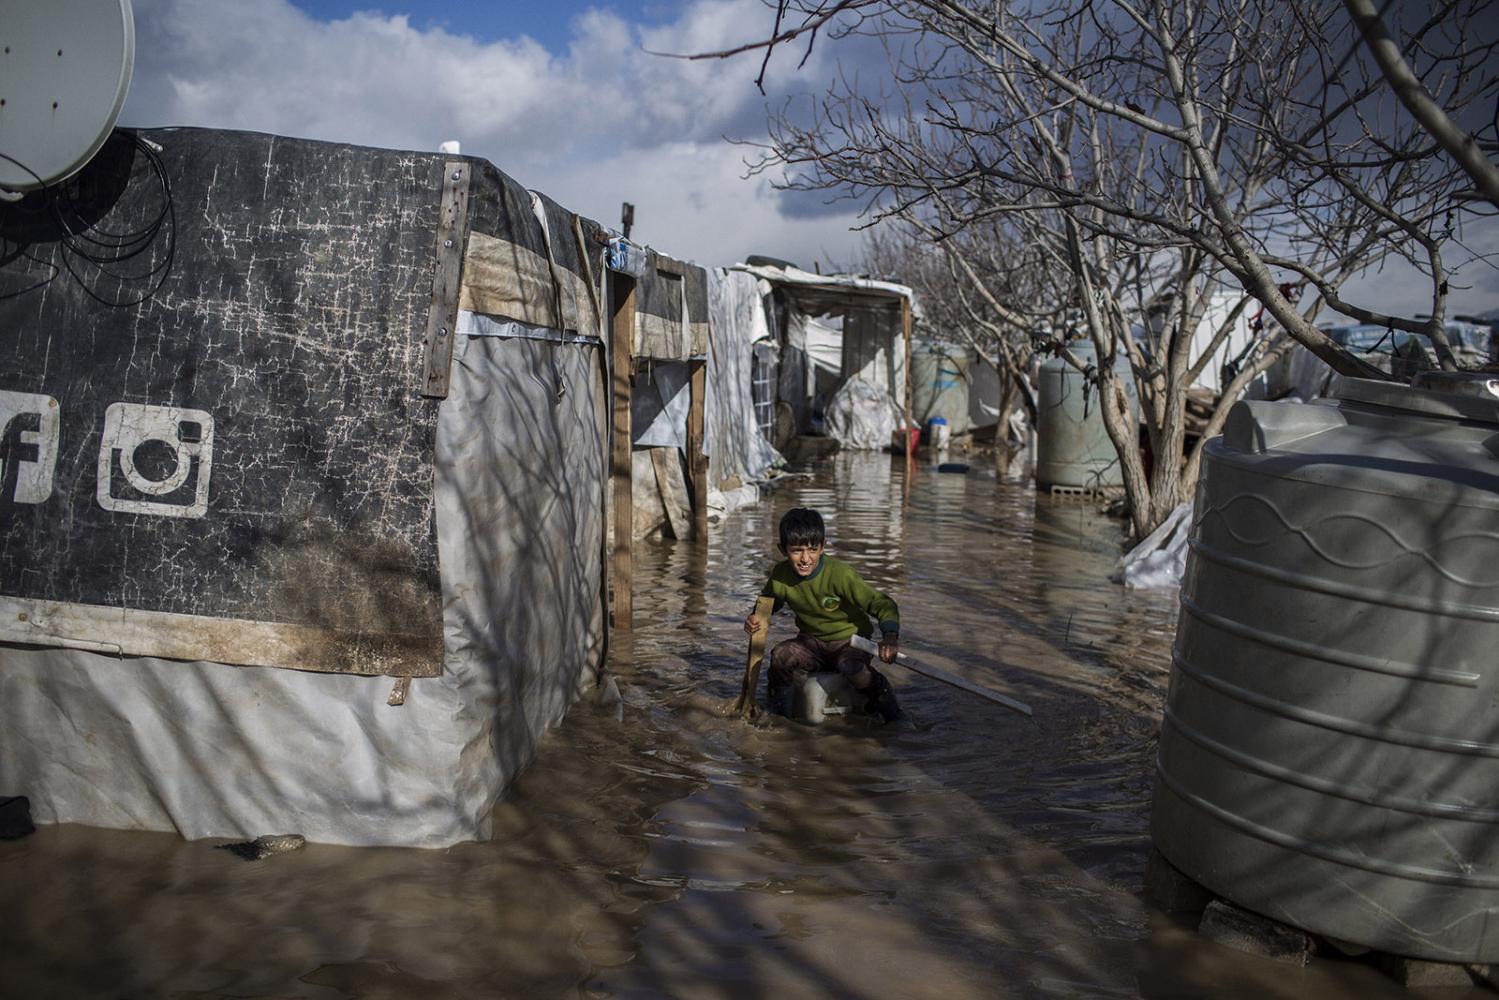 Storm - A young Syrian refugee plays at the flooded streets of...